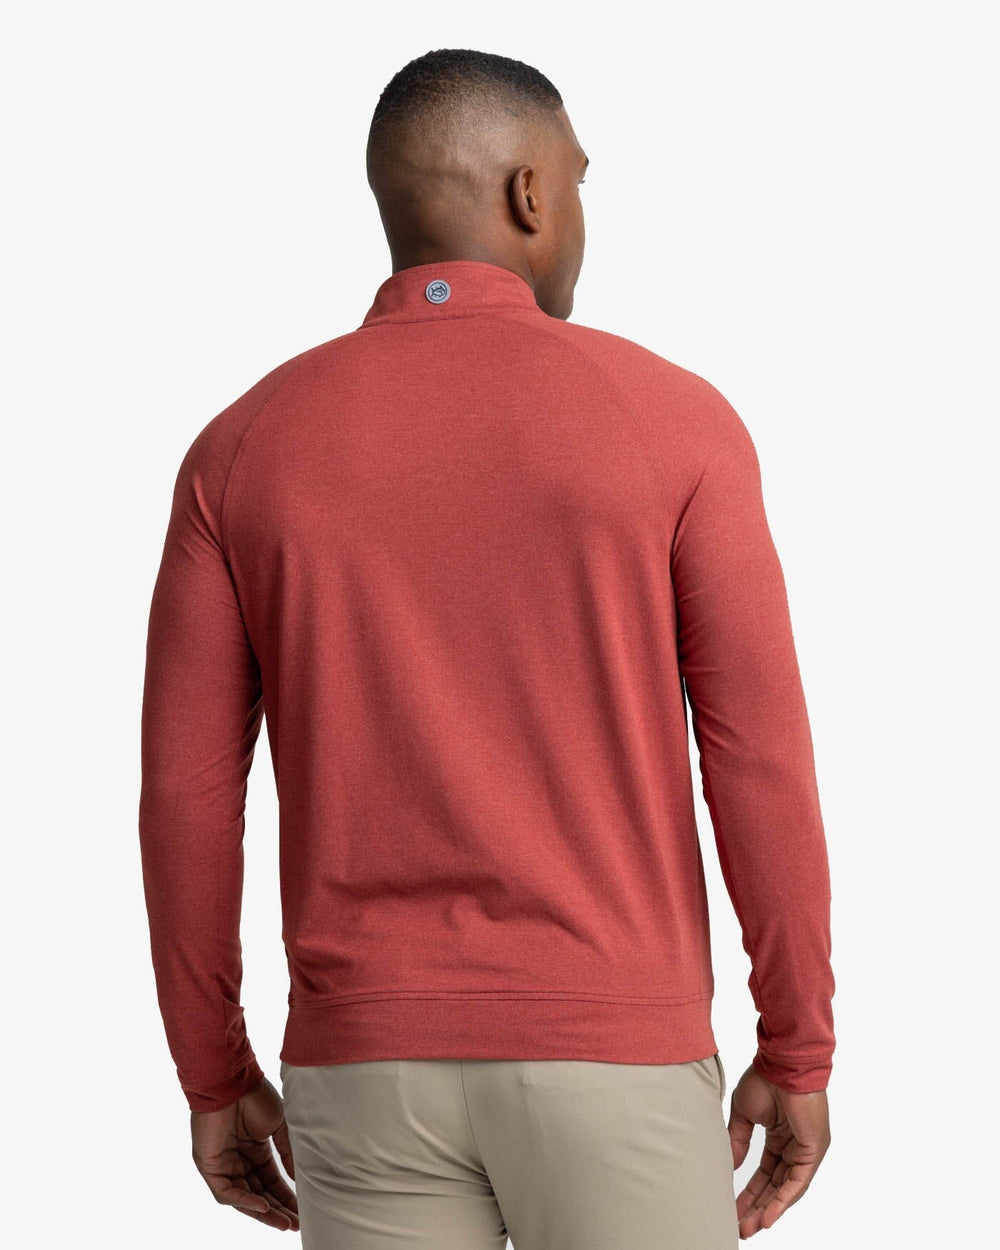 The back view of the Southern Tide Cruiser Heather Quarter Zip Pullover by Southern Tide - Heather Tuscany Red